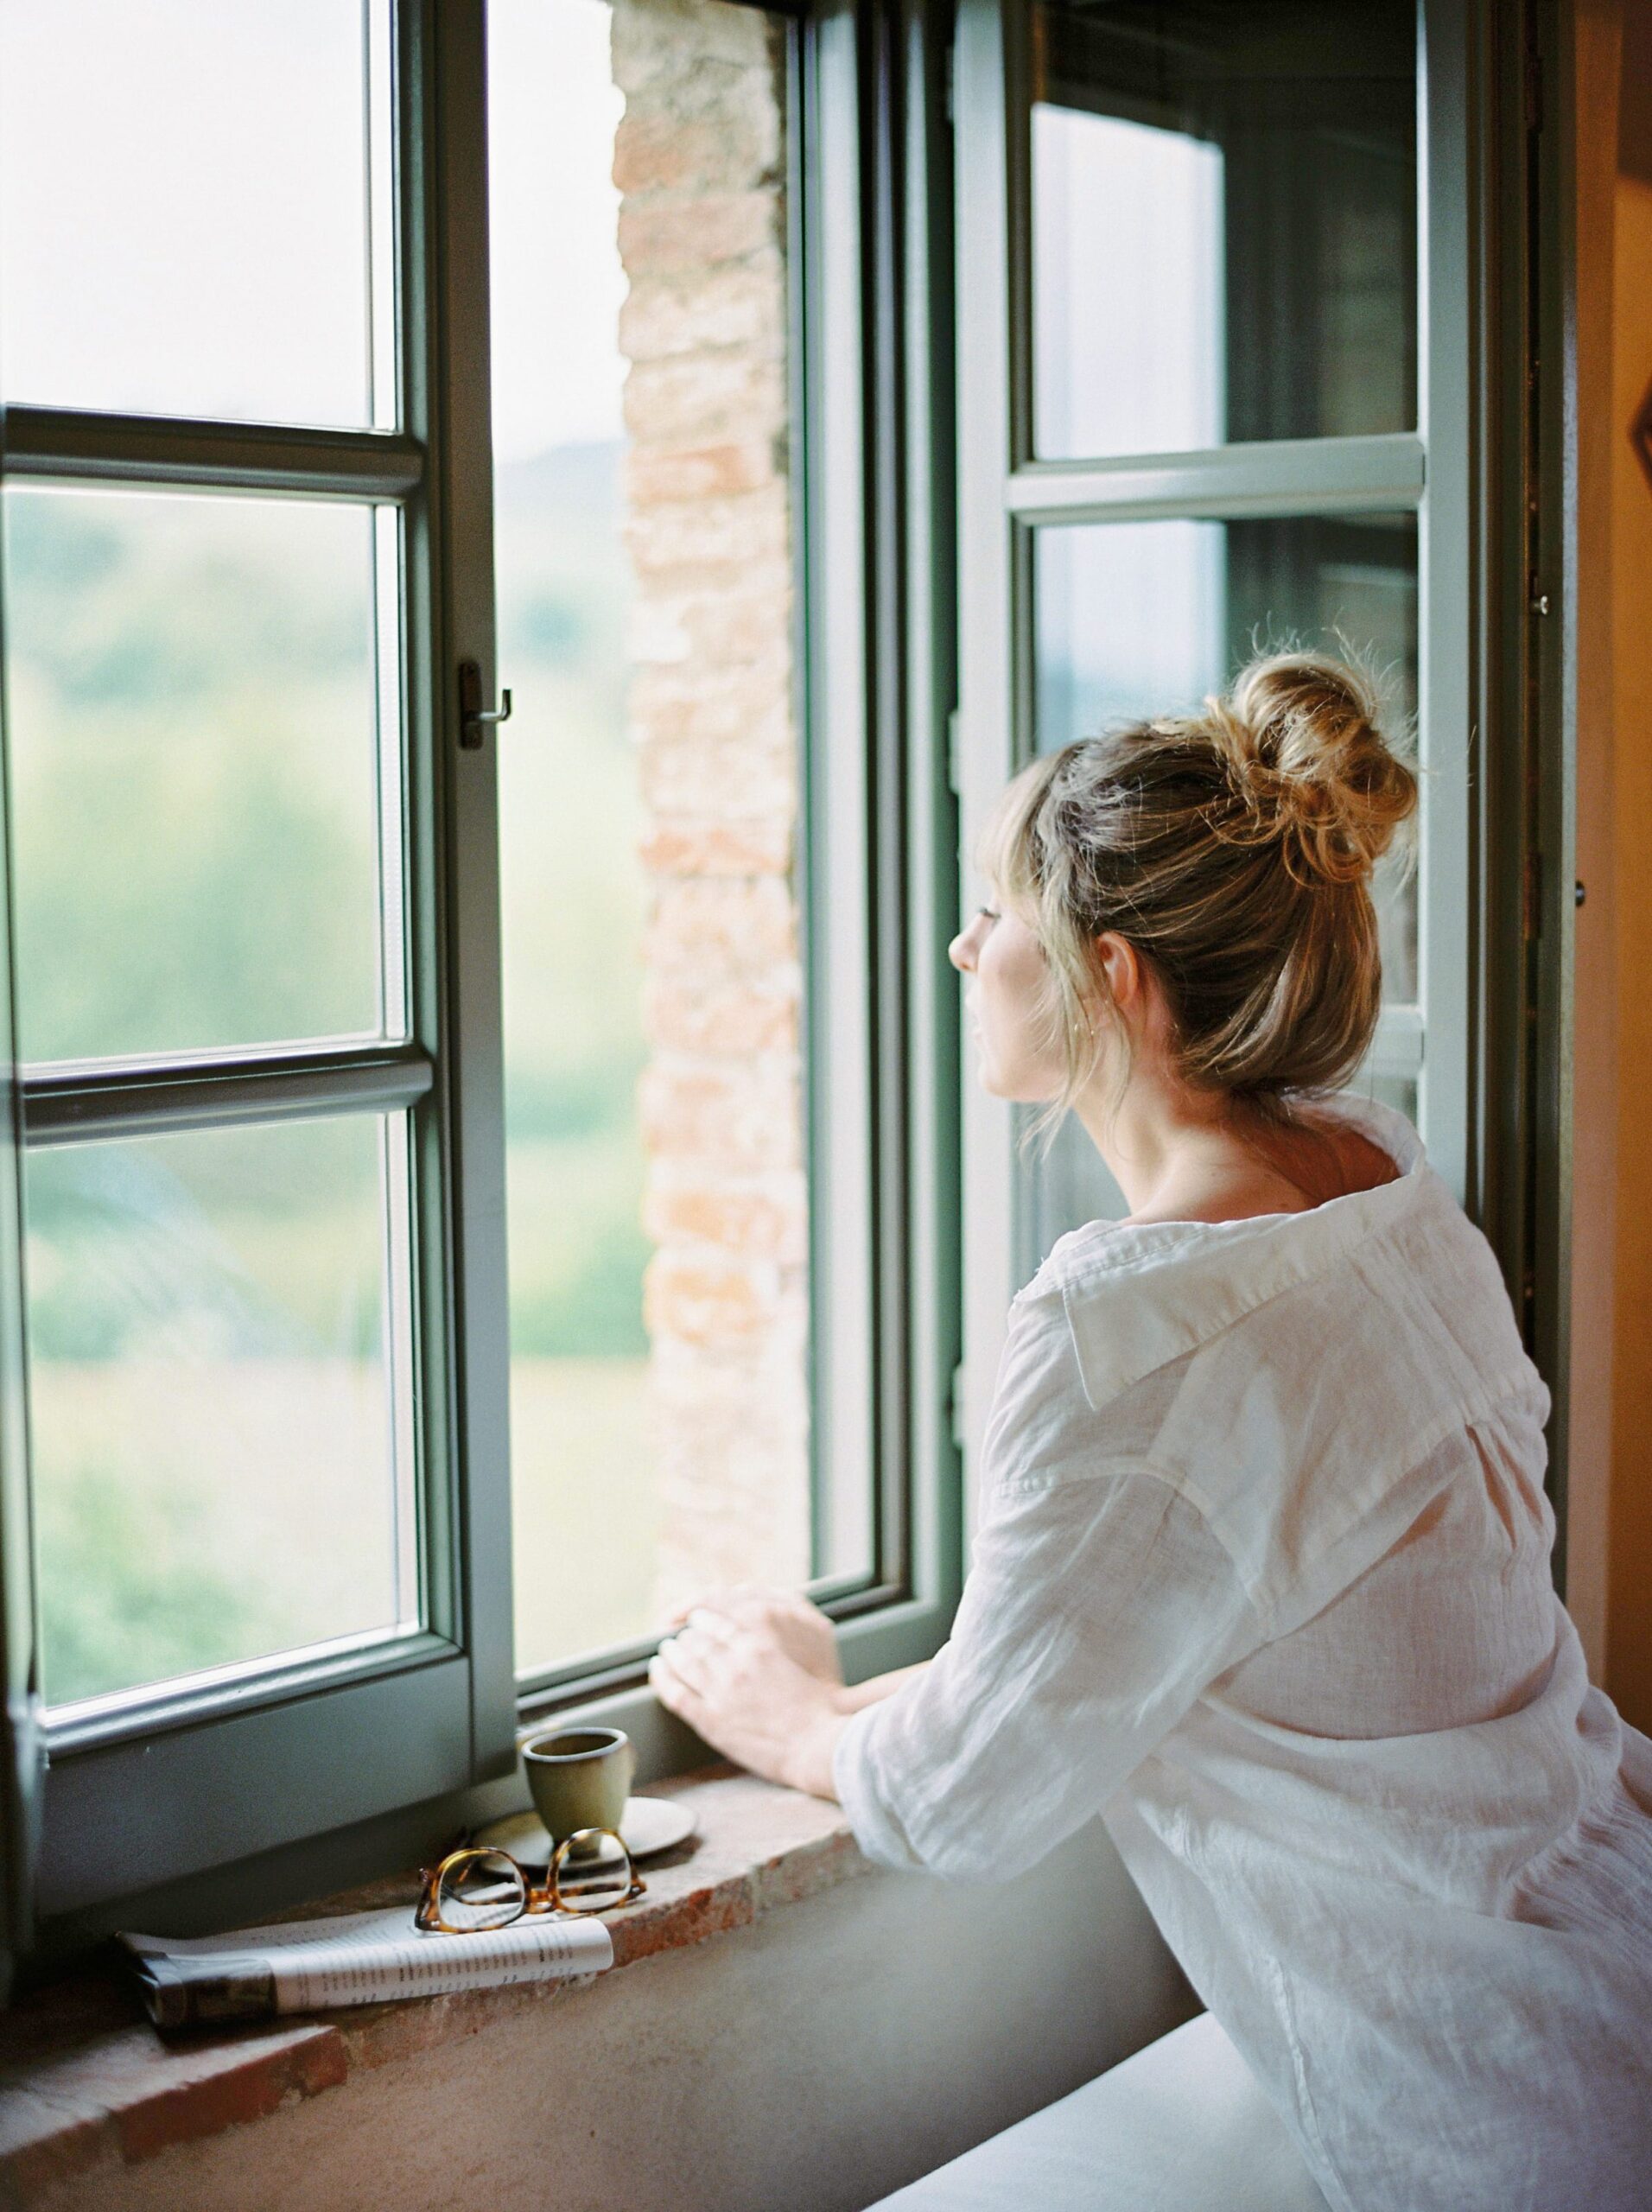 woman facing away looking out window with hair up in a bun wearing a white shirt